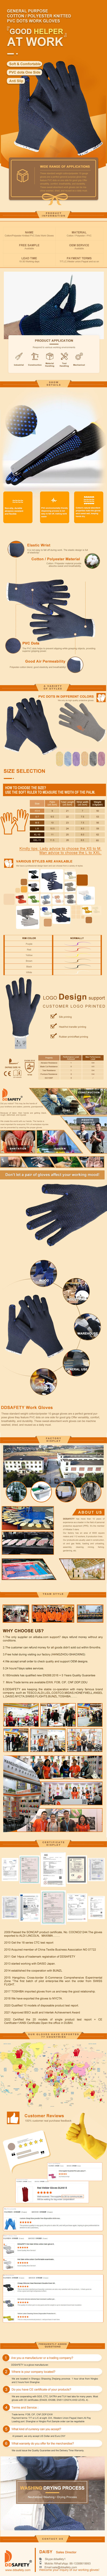 Work Gloves Anti-slip Knitted Stretchy Cloth Glove Thin Moist Glove Liners - DKP502 Work Gloves Anti-slip Knitted Stretchy Cloth Glove Thin Moist Glove Liners - DKP502 gloves,work gloves,cotton work gloves,dotted gloves,PVC Dotted Work Gloves